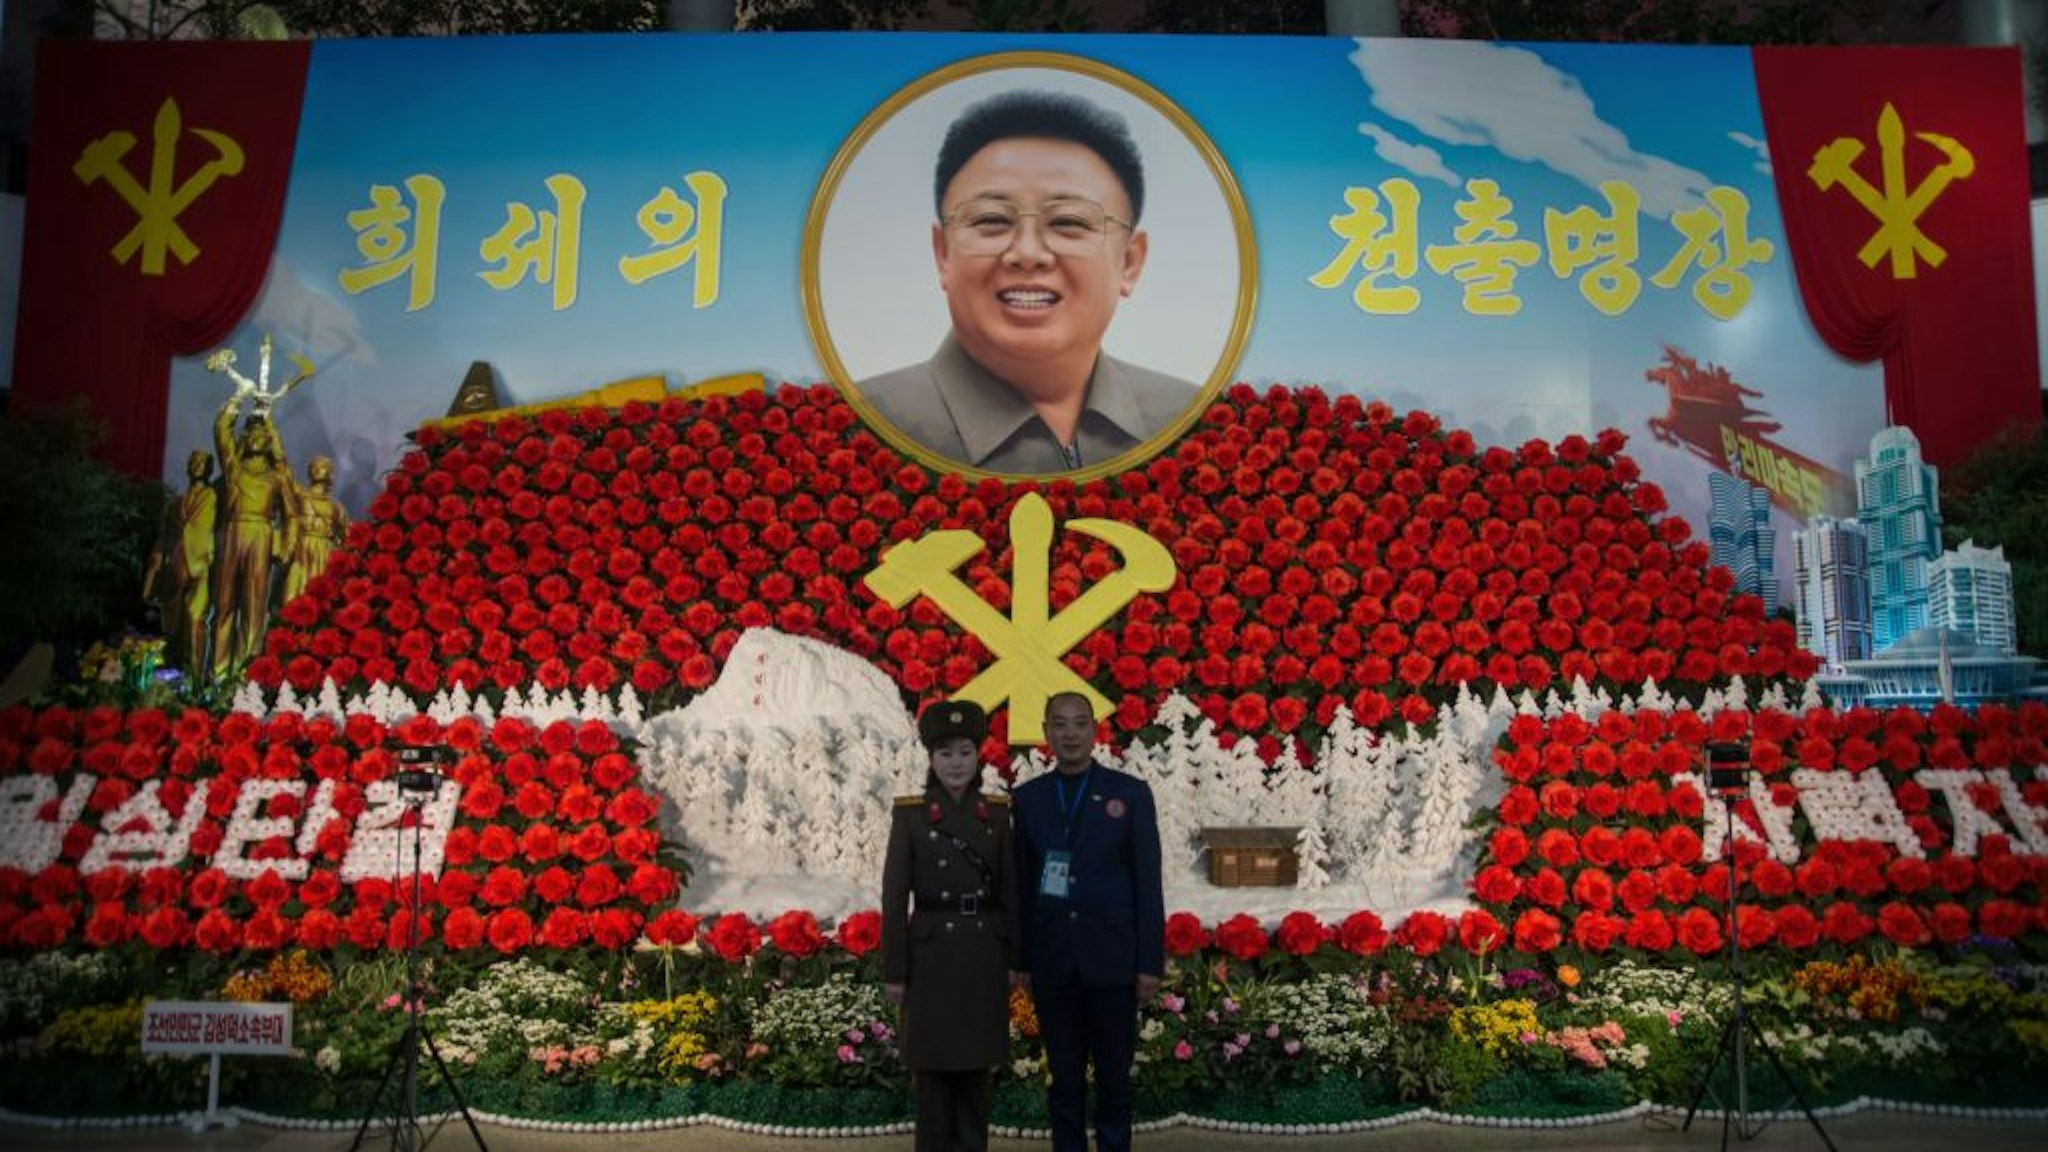 A foreign visitor (R) stands for a photo with a Korean People's Army (KPA) soldier in front of a portrait of late North Korean leader Kim Jong IL, at the 22nd 'Kimjongilia Festival' flower festival marking the upcoming 'Day of Shining Star', the anniversary of the Kim's birth, in Pyongyang on February 13, 2018.